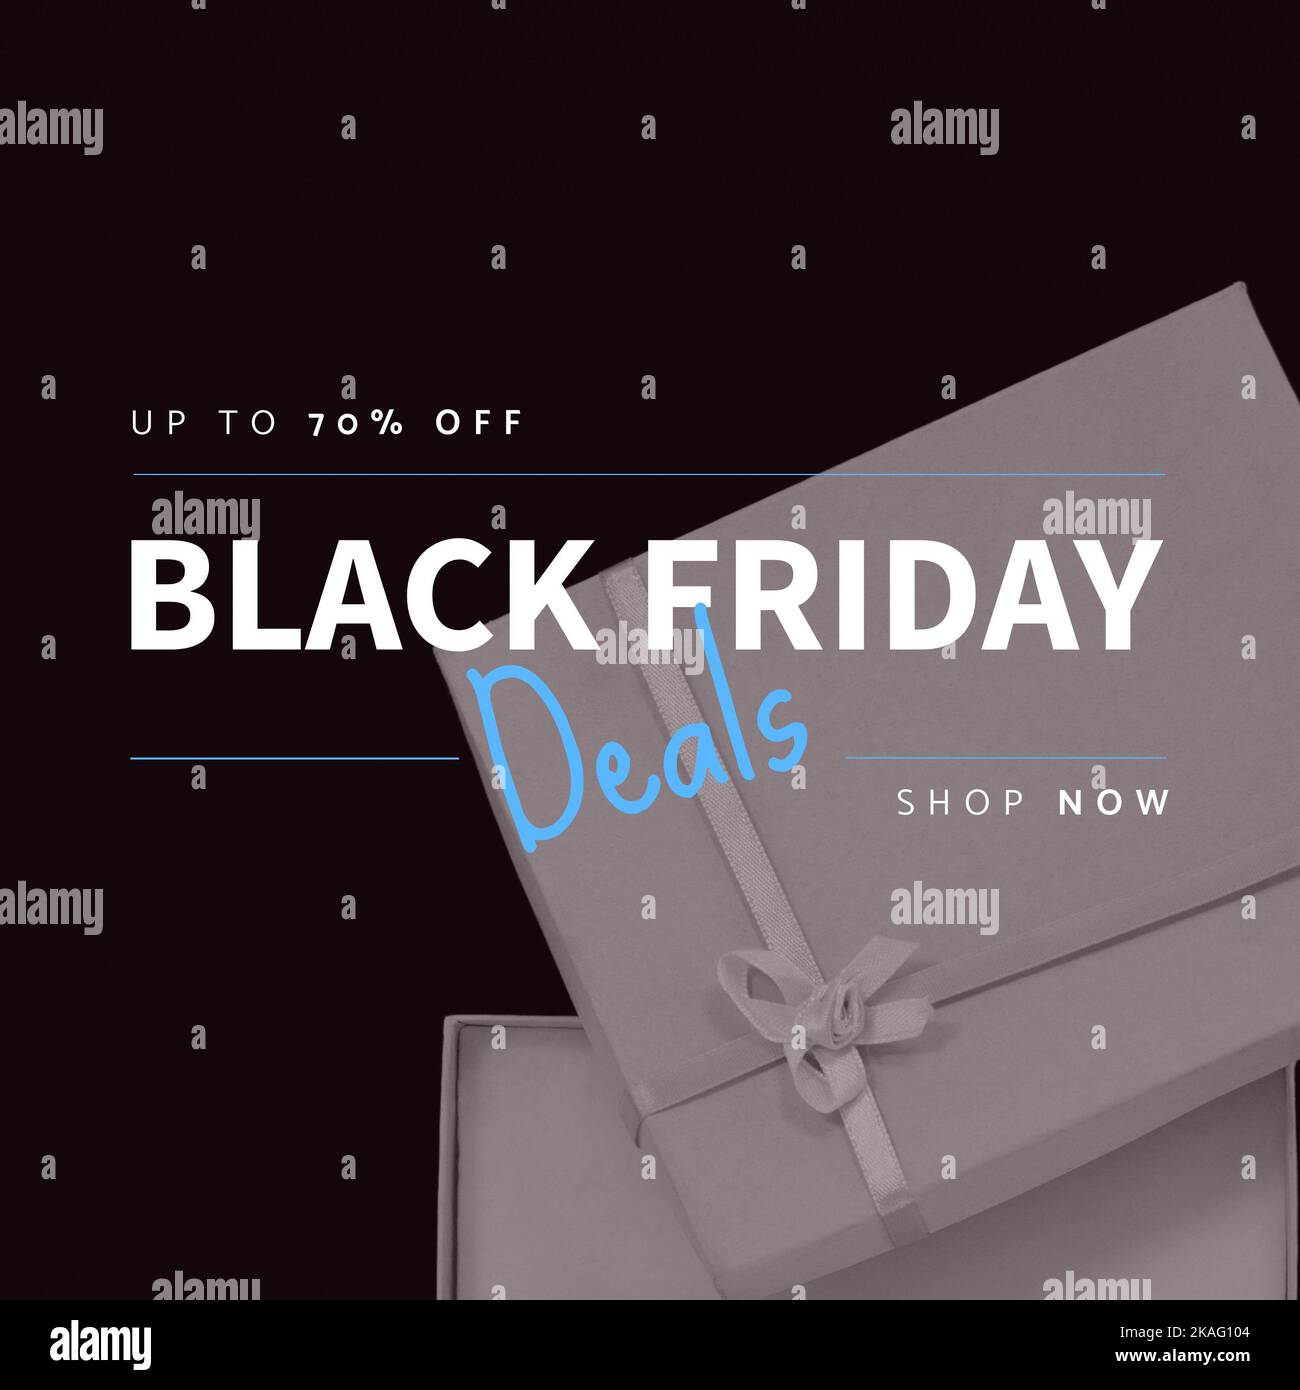 Composition of up to 70 percent off black friday deals shop now text over presents Stock Photo